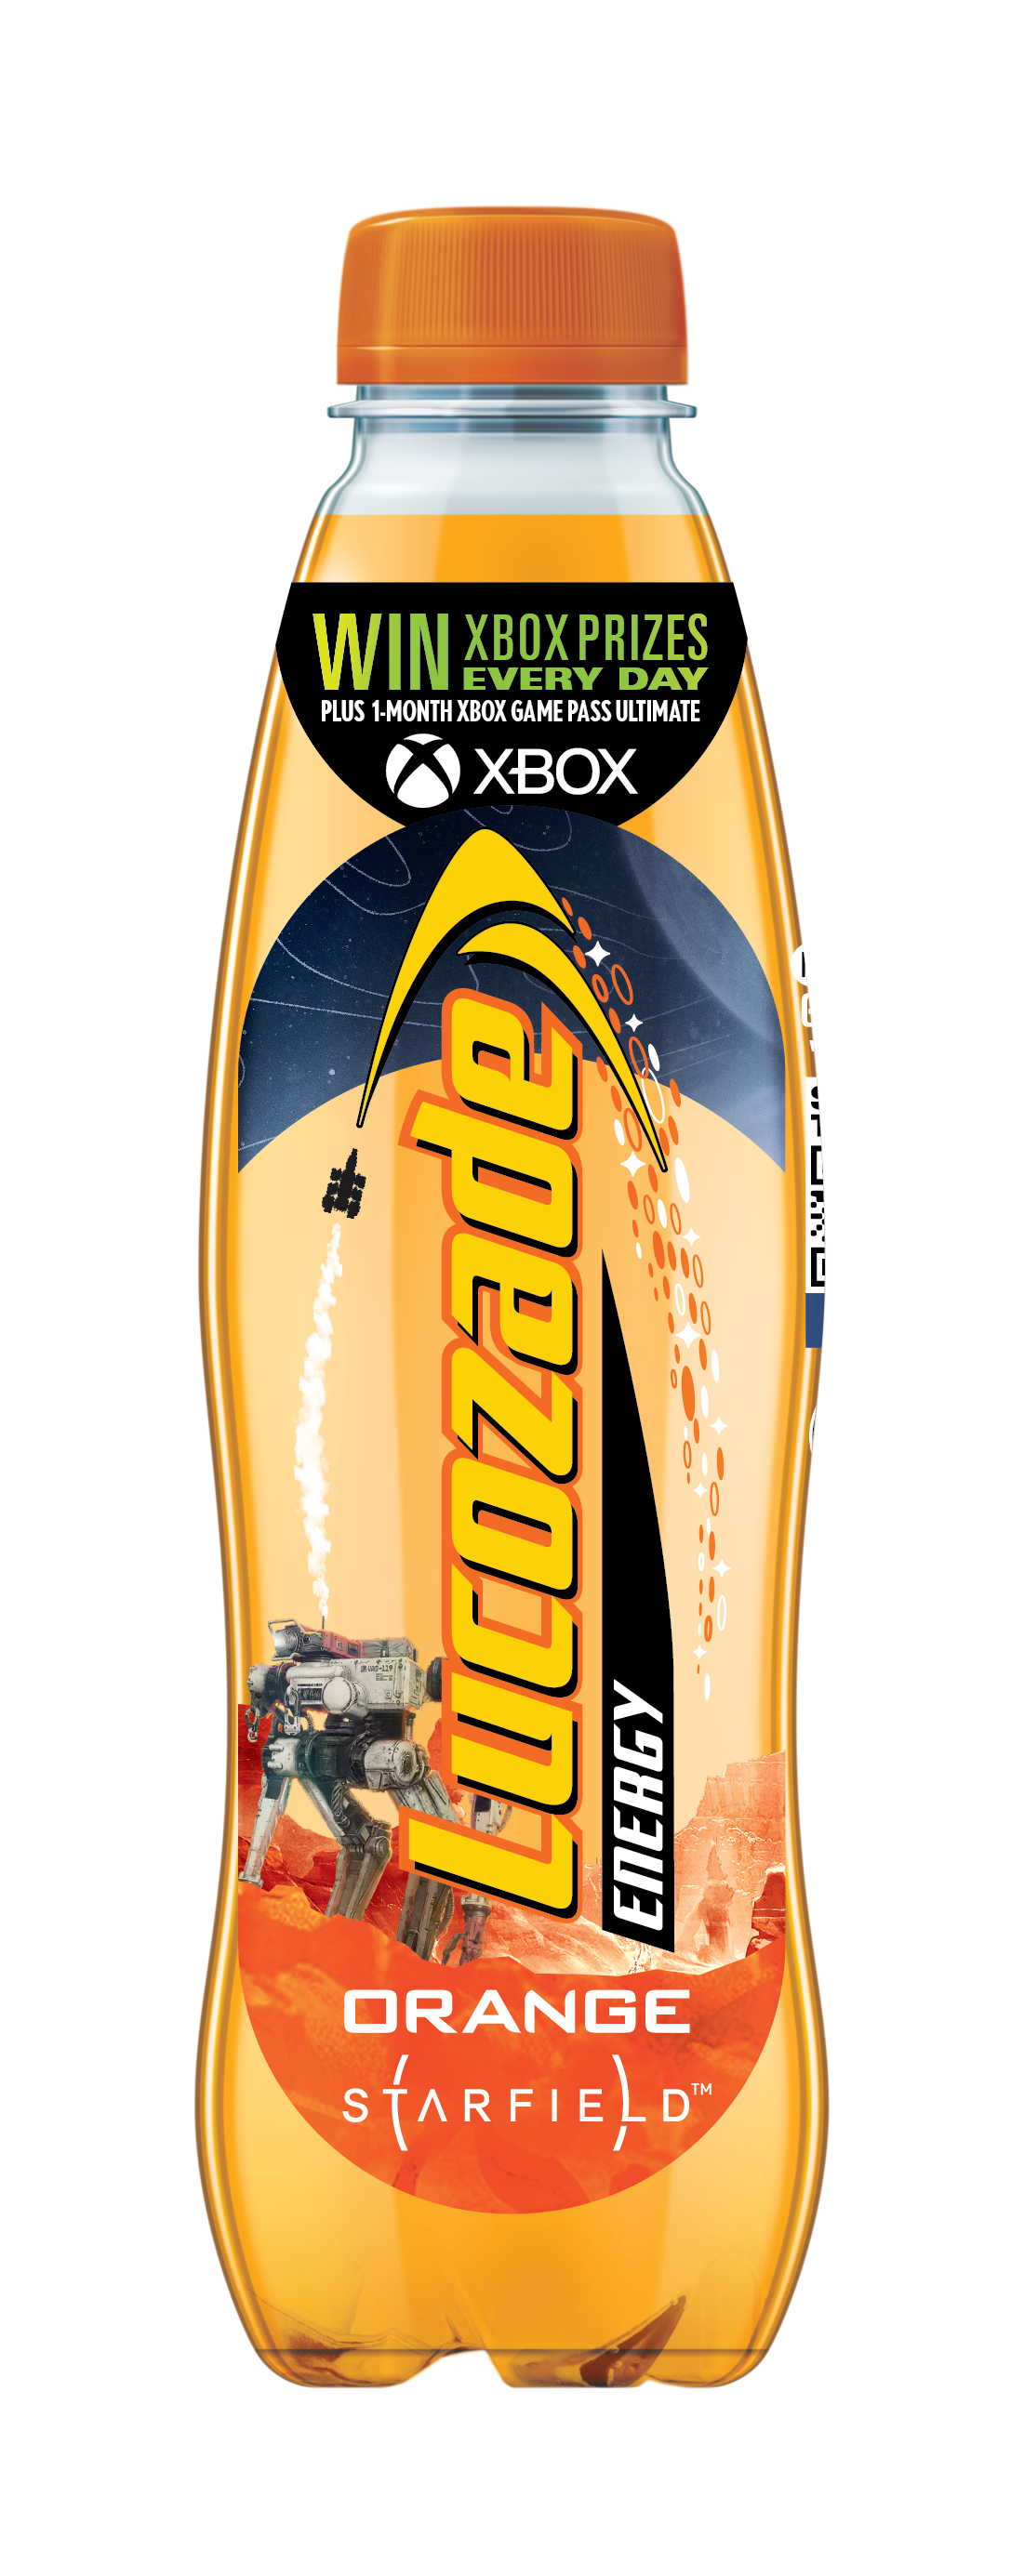 Lucozade Energy and Xbox join forces to celebrate launch of Starfield